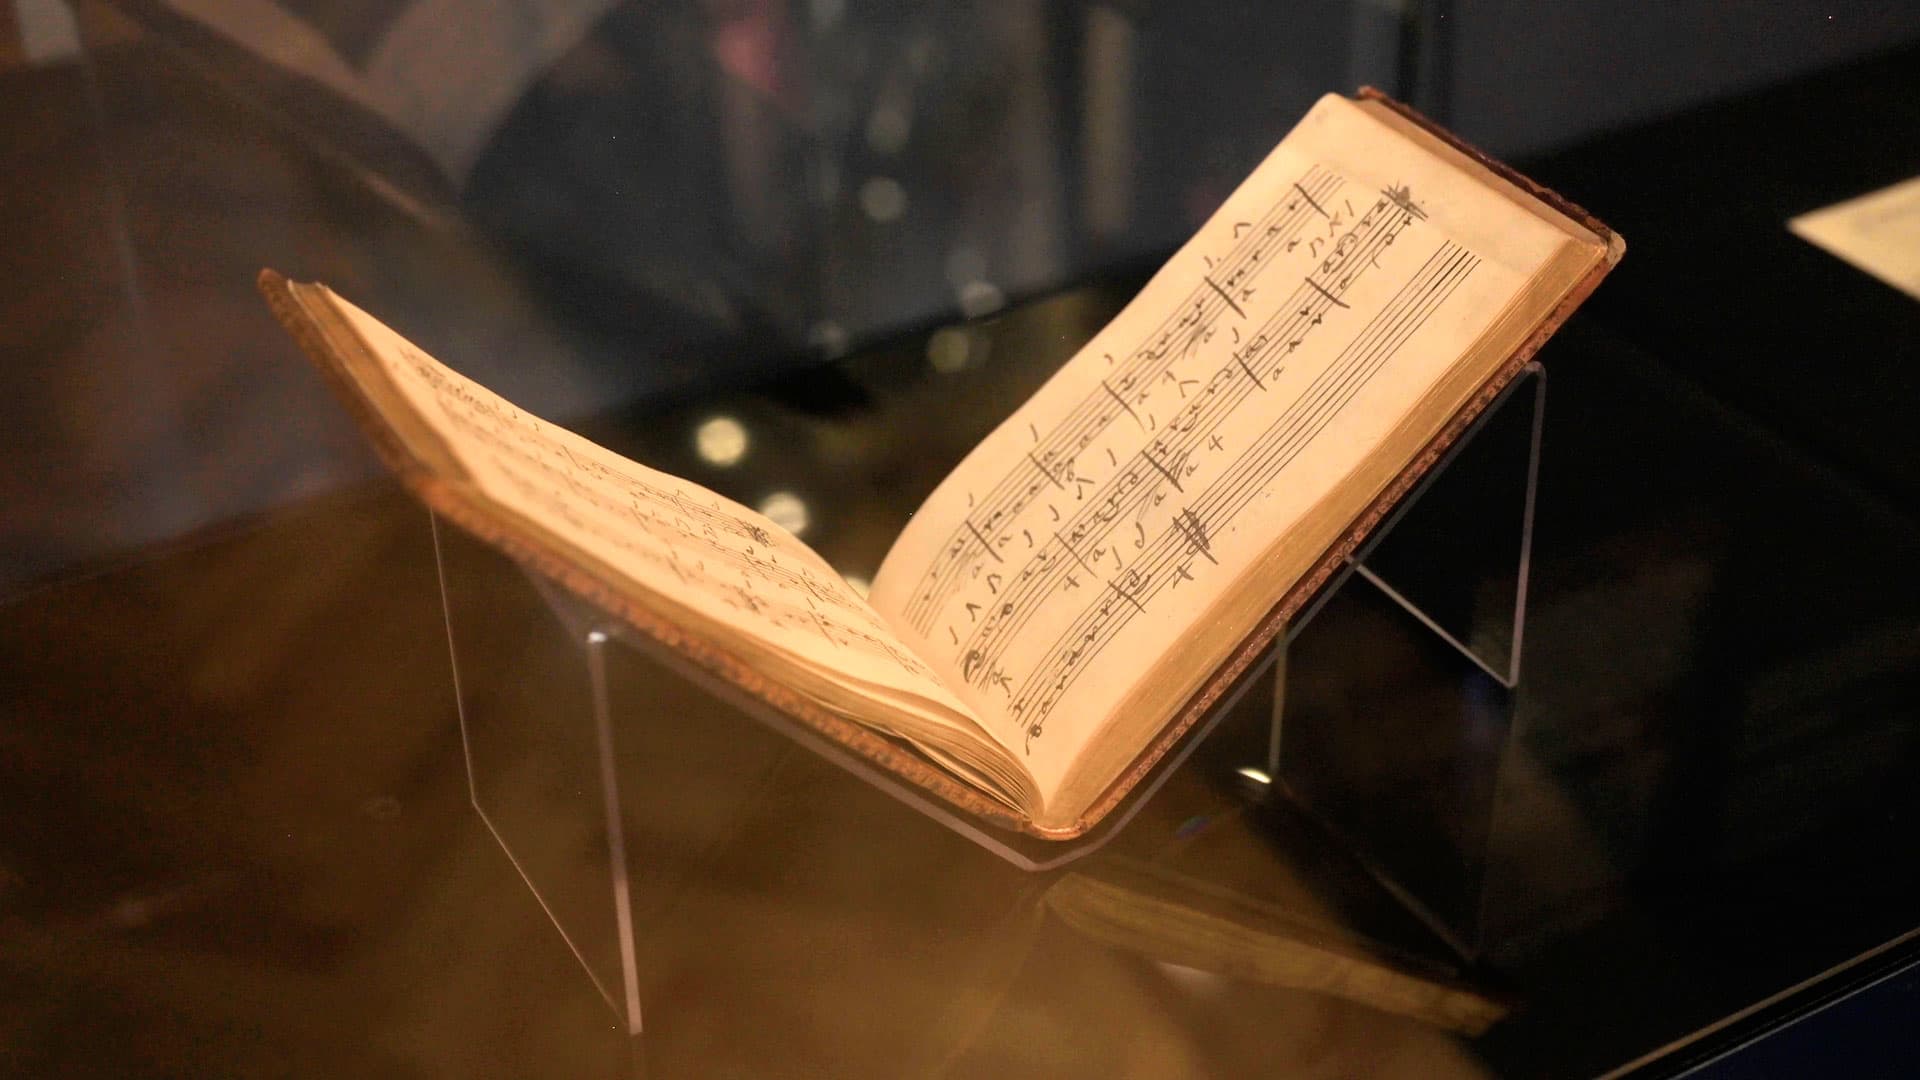 Menuet, an early 18th-century lute tablature composed by Anna Maria Wilhelmina Althann, wife of the 4th Prince Lobkowicz, displayed at the Lobkowicz Palace.